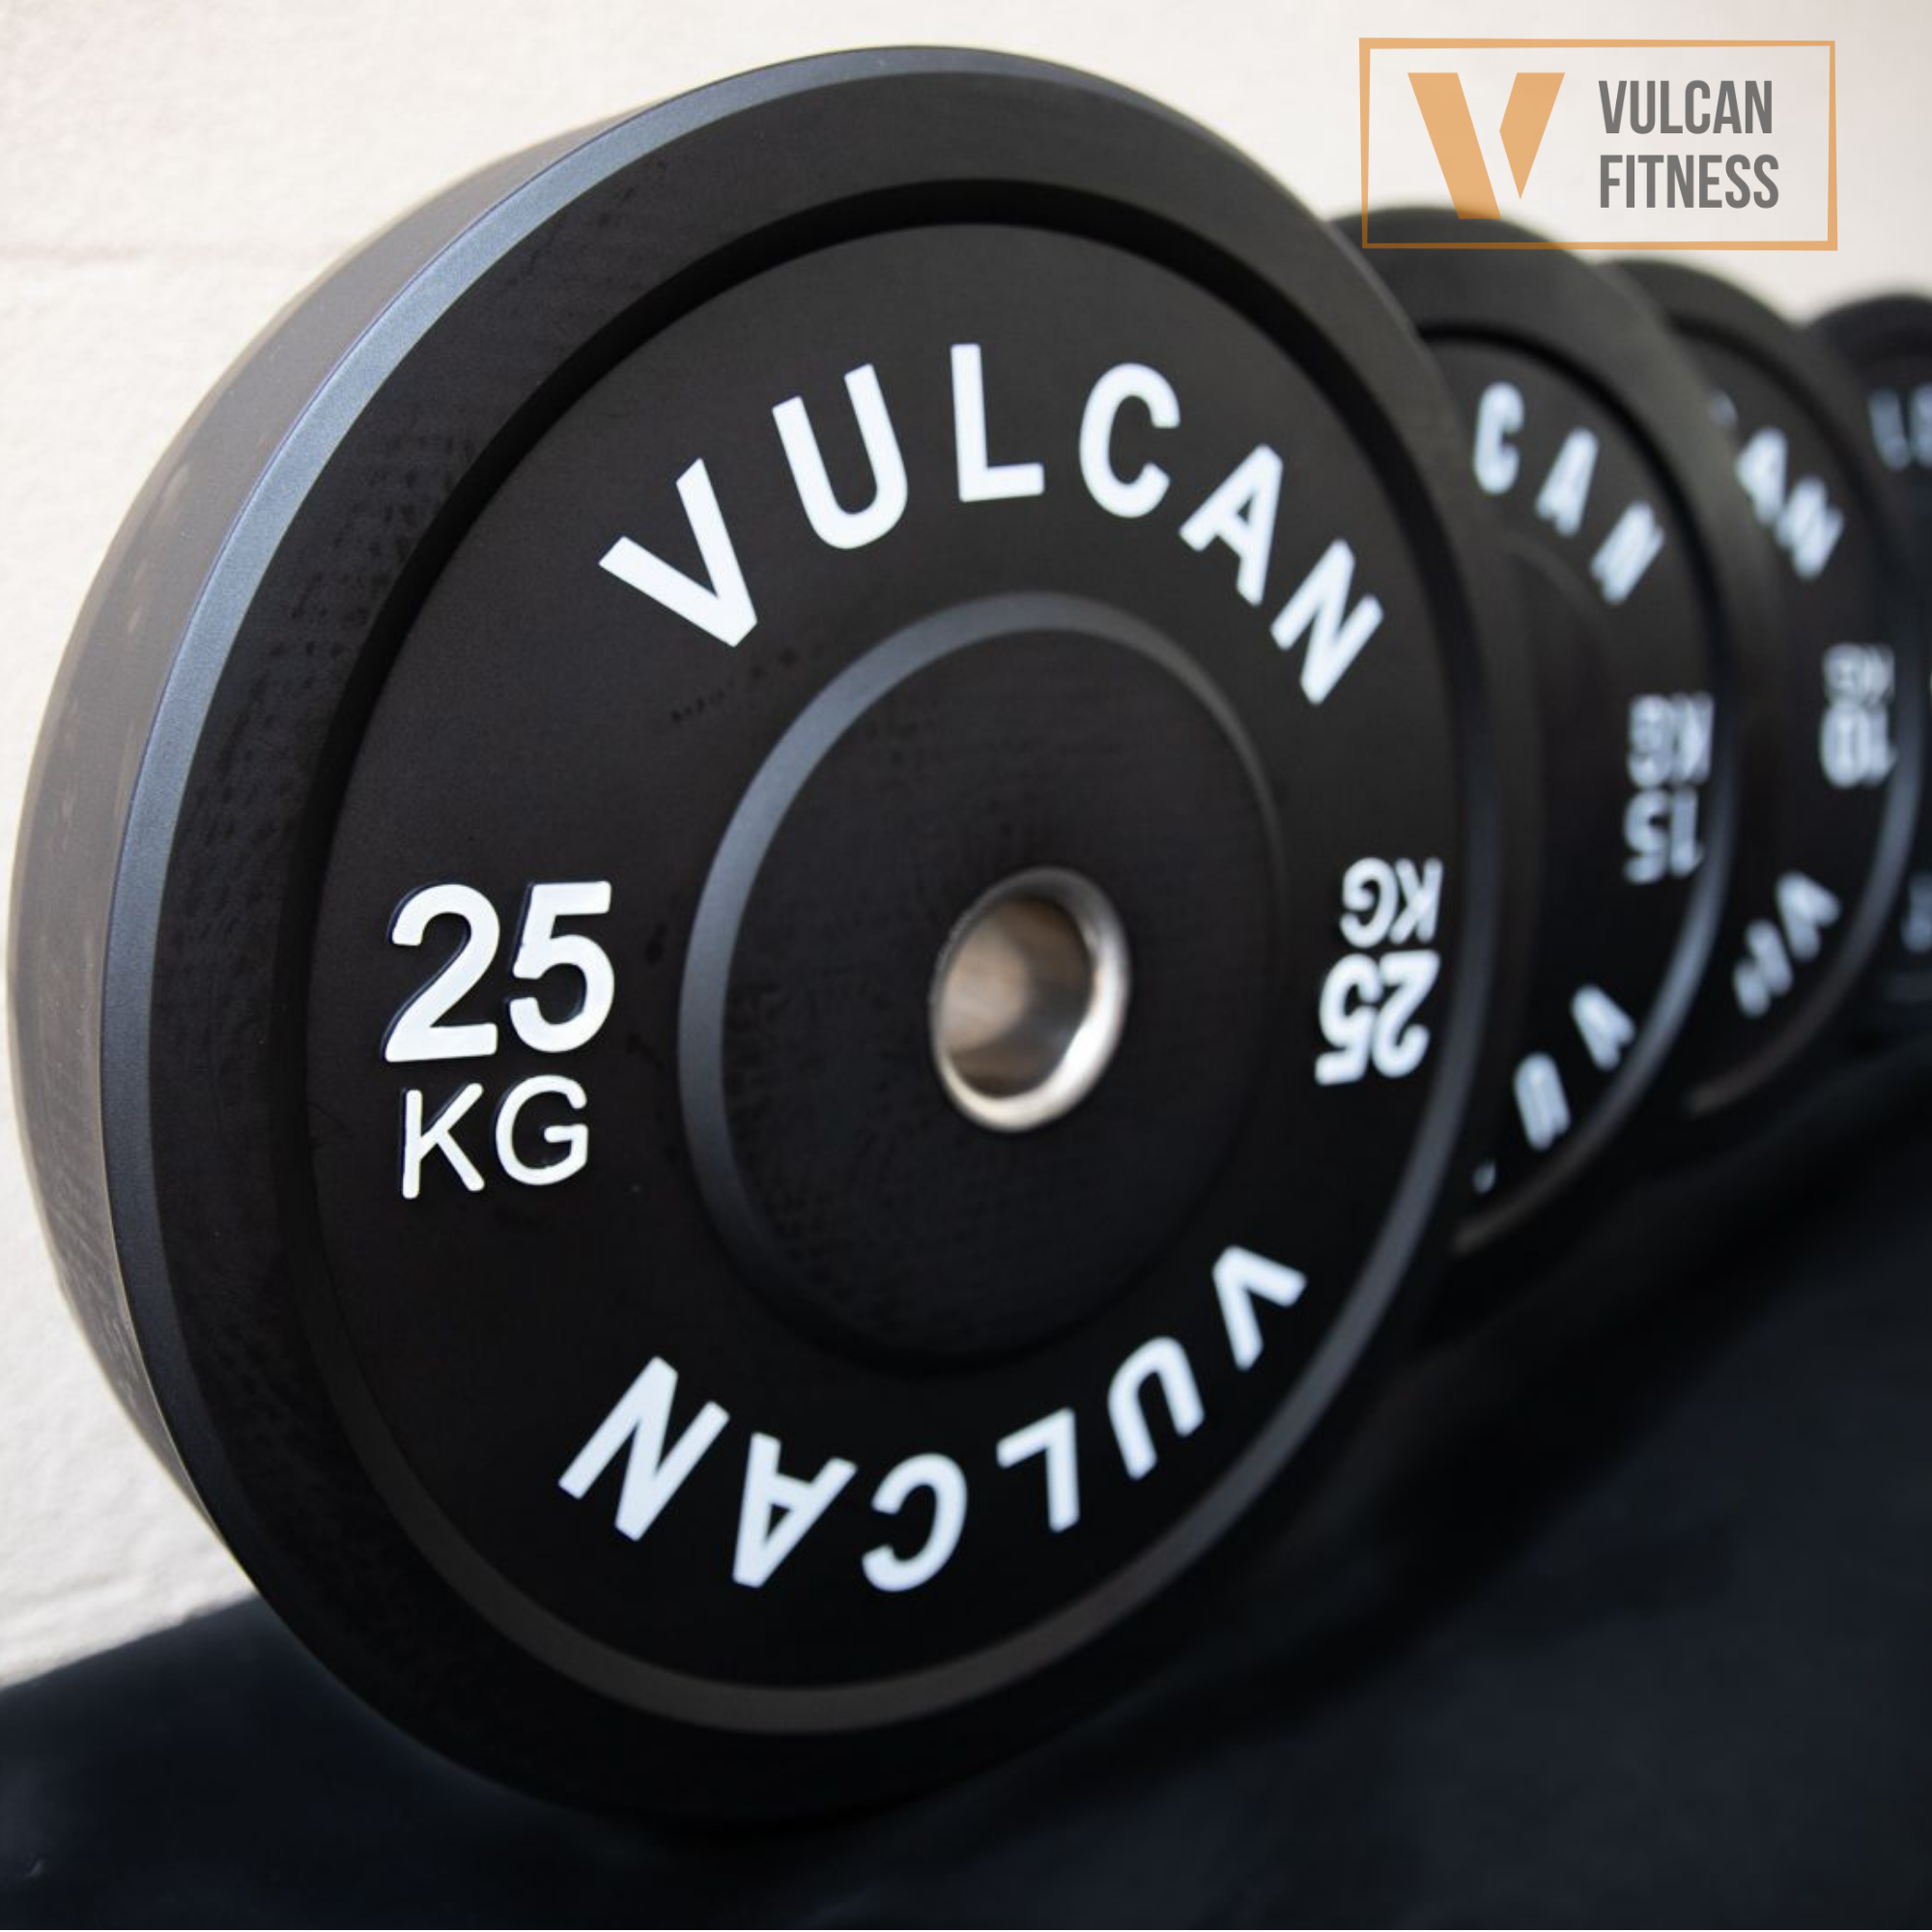 VULCAN Commercial Power Cage, Olympic Barbell, 100kg Black Bumper Weight Plates & Adjustable Bench | IN STOCK